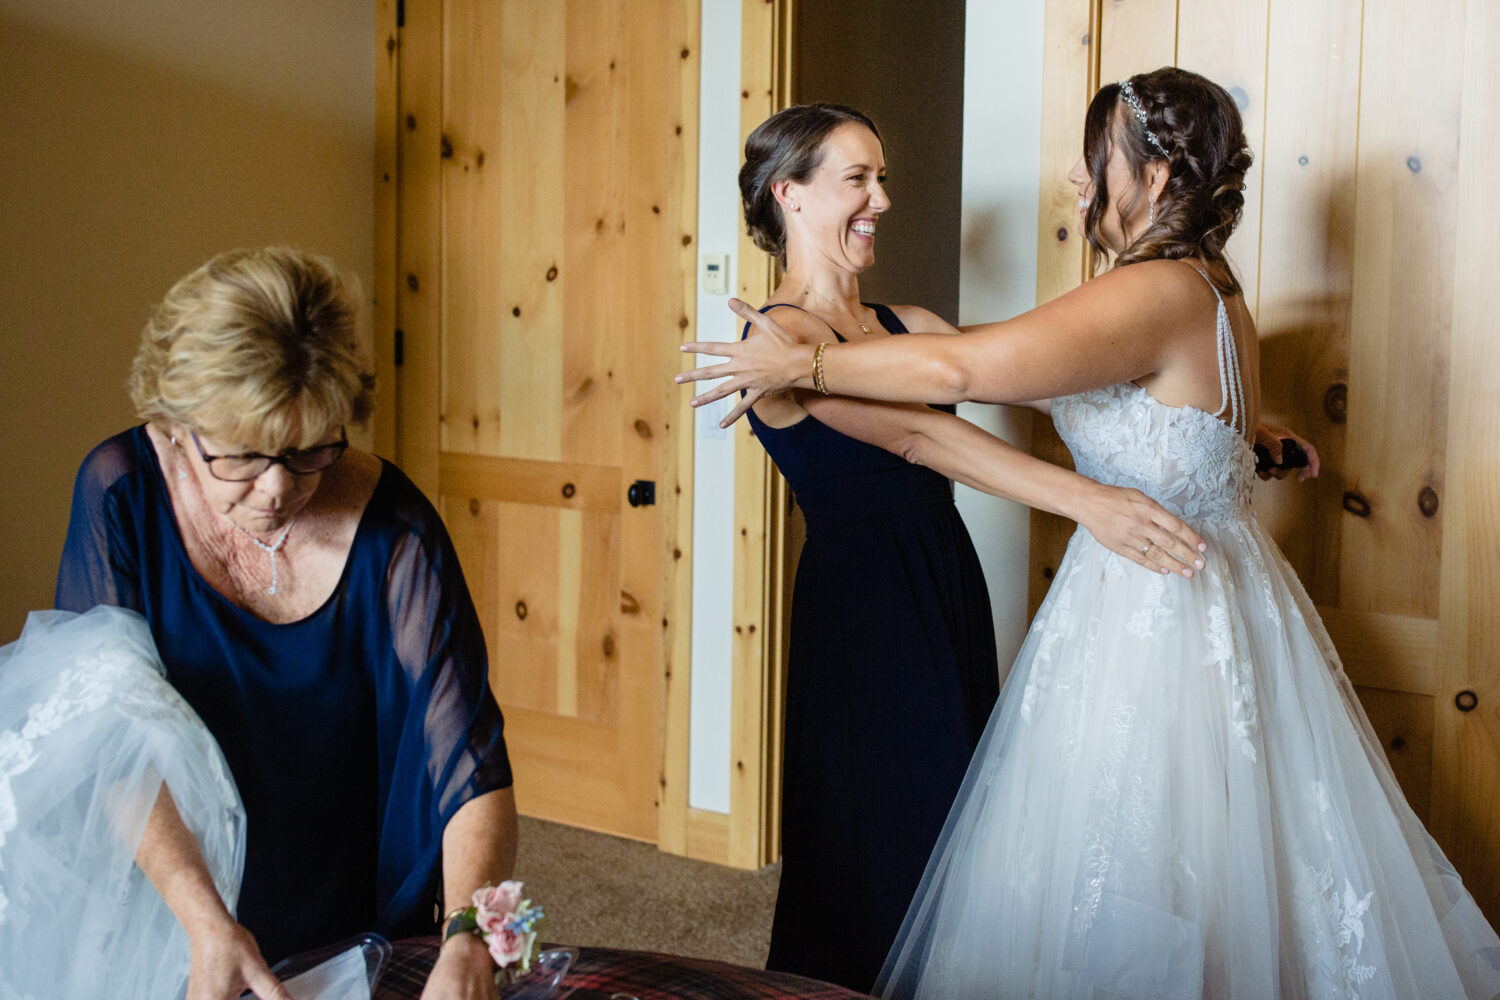 A joyful moment shared between the bride and her best friend, captured by Lake Tahoe wedding photographer Chris Werner.